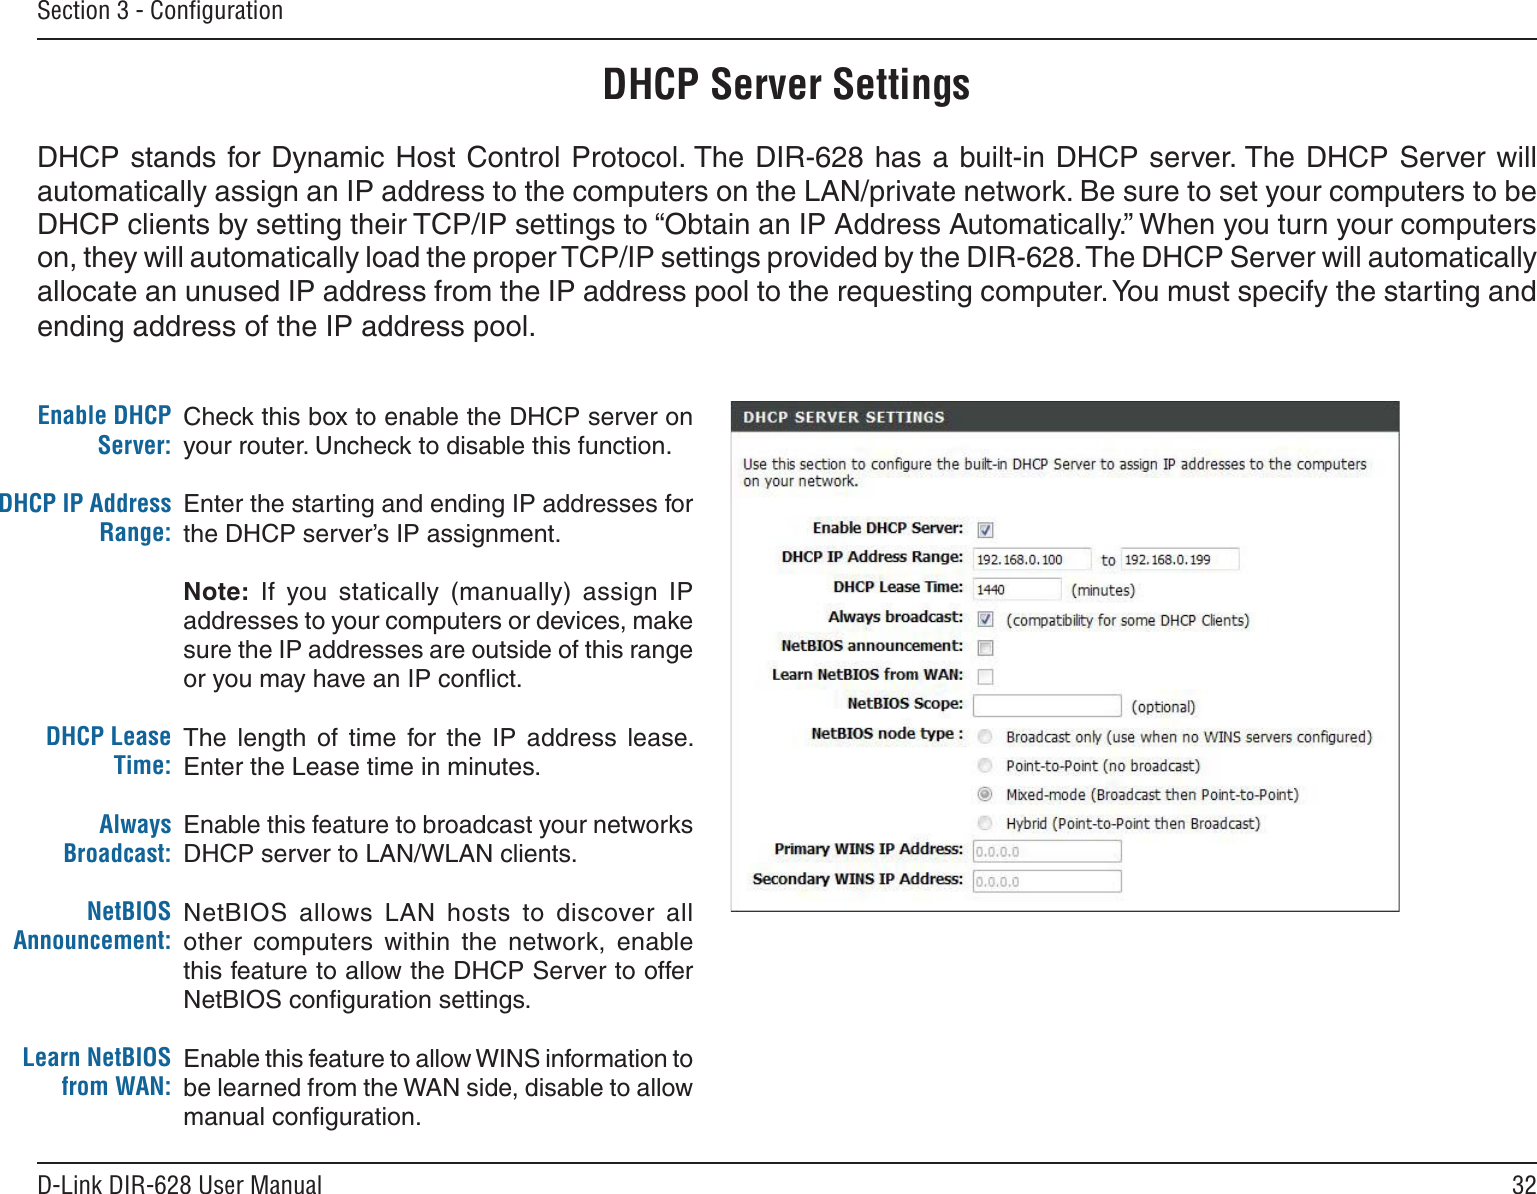 32D-Link DIR-628 User ManualSection 3 - ConﬁgurationCheck this box to enable the DHCP server on your router. Uncheck to disable this function.Enter the starting and ending IP addresses for the DHCP server’s IP assignment.Note:  If  you  statically  (manually)  assign  IP addresses to your computers or devices, make sure the IP addresses are outside of this range or you may have an IP conﬂict. The  length  of  time  for  the  IP  address  lease. Enter the Lease time in minutes.Enable this feature to broadcast your networks DHCP server to LAN/WLAN clients.NetBIOS  allows  LAN  hosts  to  discover  all other  computers  within  the  network,  enable this feature to allow the DHCP Server to offer NetBIOS conﬁguration settings.Enable this feature to allow WINS information to be learned from the WAN side, disable to allow manual conﬁguration.Enable DHCP Server:DHCP IP Address Range:DHCP Lease Time:Always Broadcast:NetBIOS Announcement:Learn NetBIOS from WAN:DHCP Server SettingsDHCP stands for Dynamic Host Control Protocol. The DIR-628 has a built-in DHCP server. The DHCP Server will automatically assign an IP address to the computers on the LAN/private network. Be sure to set your computers to be DHCP clients by setting their TCP/IP settings to “Obtain an IP Address Automatically.” When you turn your computers on, they will automatically load the proper TCP/IP settings provided by the DIR-628. The DHCP Server will automatically allocate an unused IP address from the IP address pool to the requesting computer. You must specify the starting and ending address of the IP address pool.